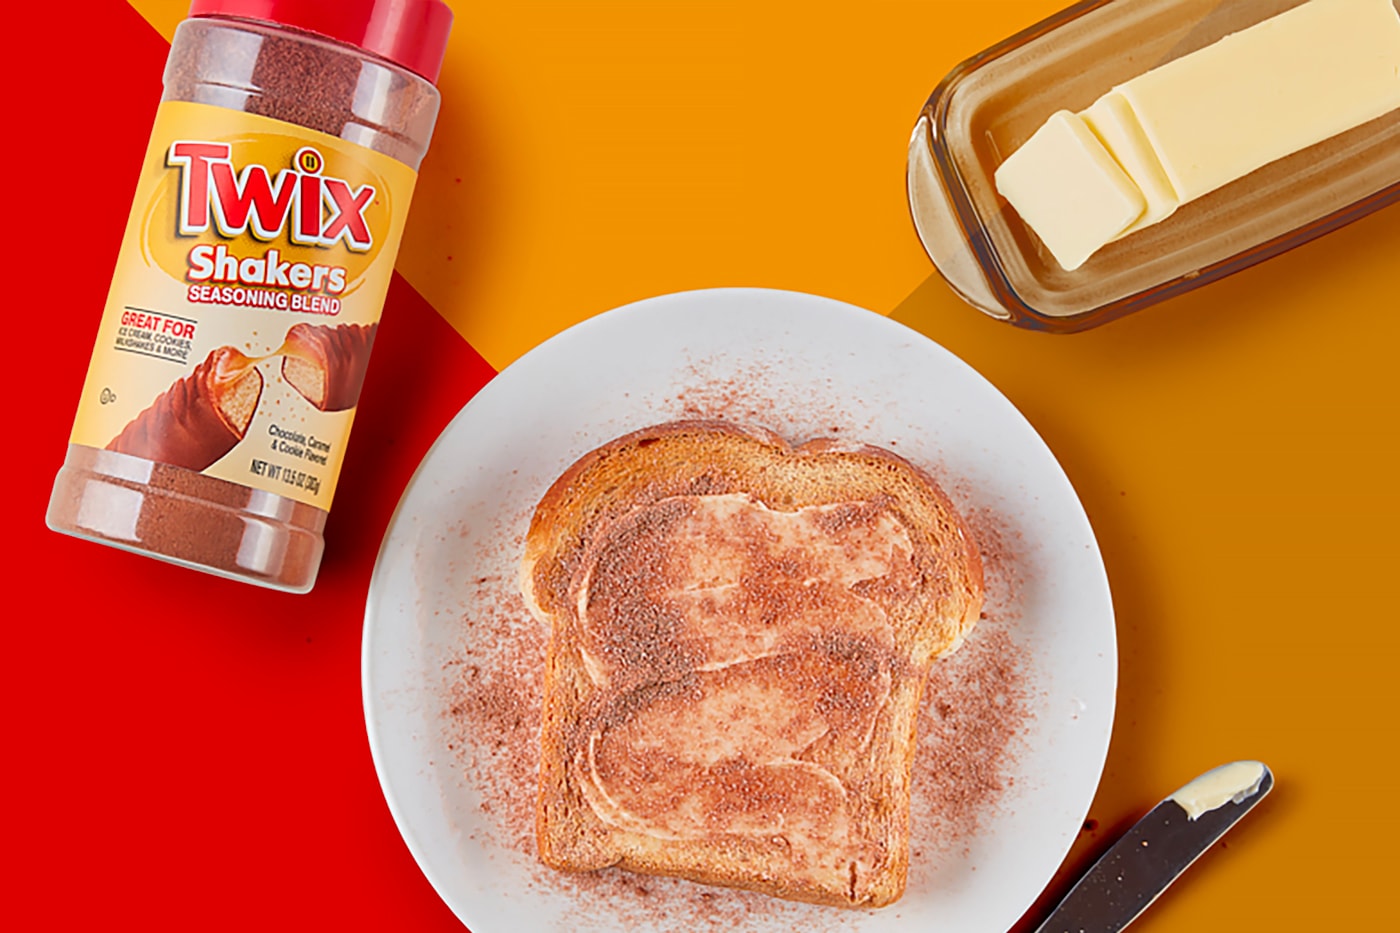 Twix Launches Seasoning to Sprinkle its Chocolate Bar Flavors on Anything